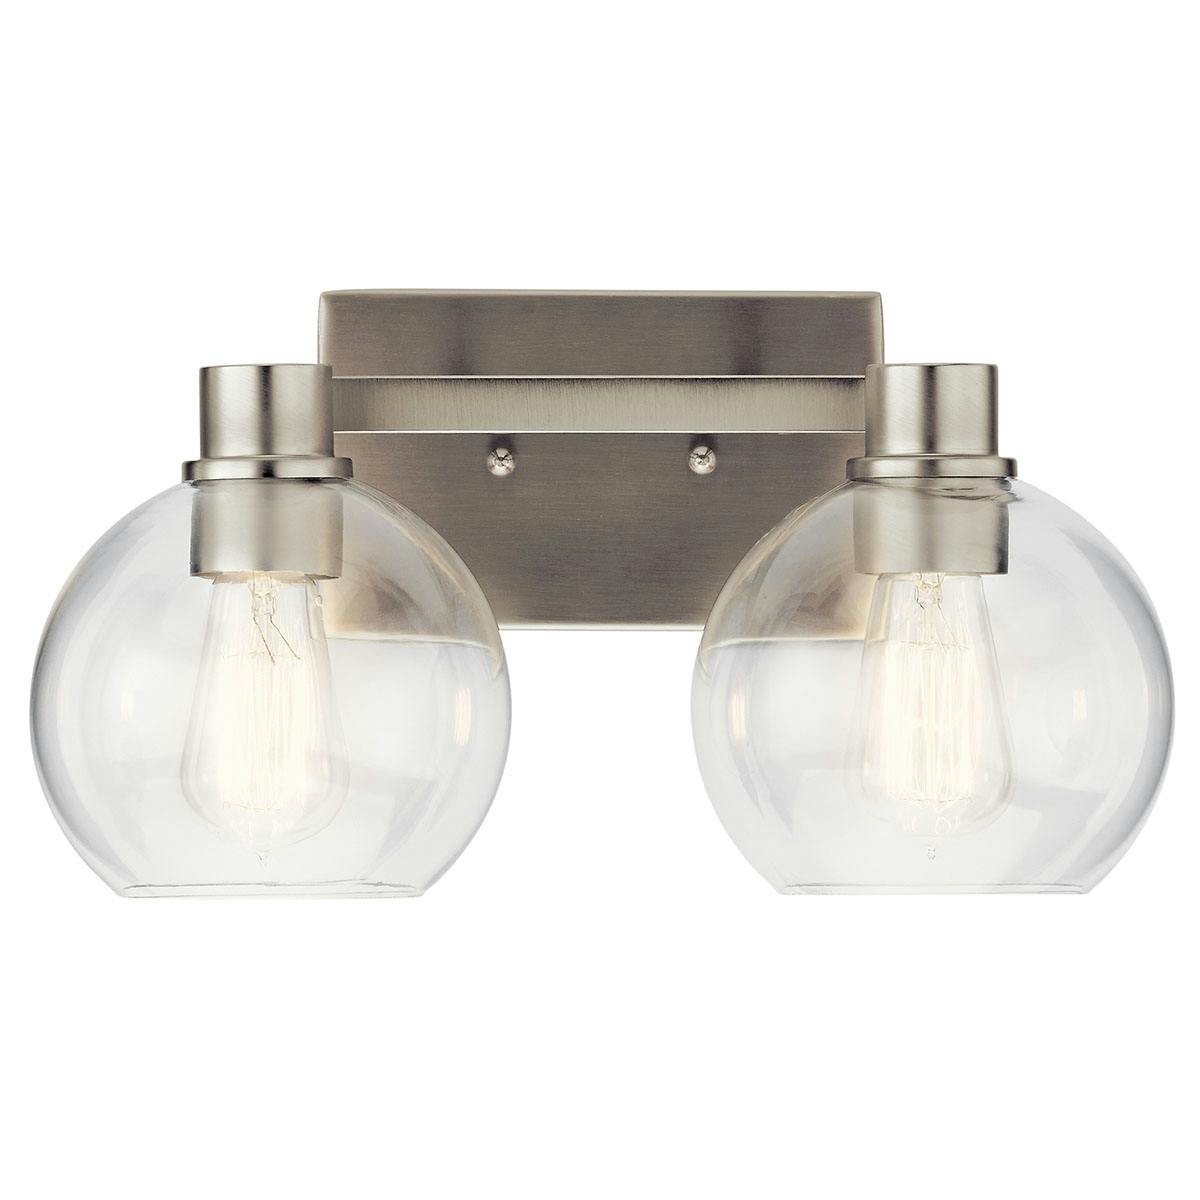 The Harmony 2 Light Vanity Light Nickel facing down on a white background